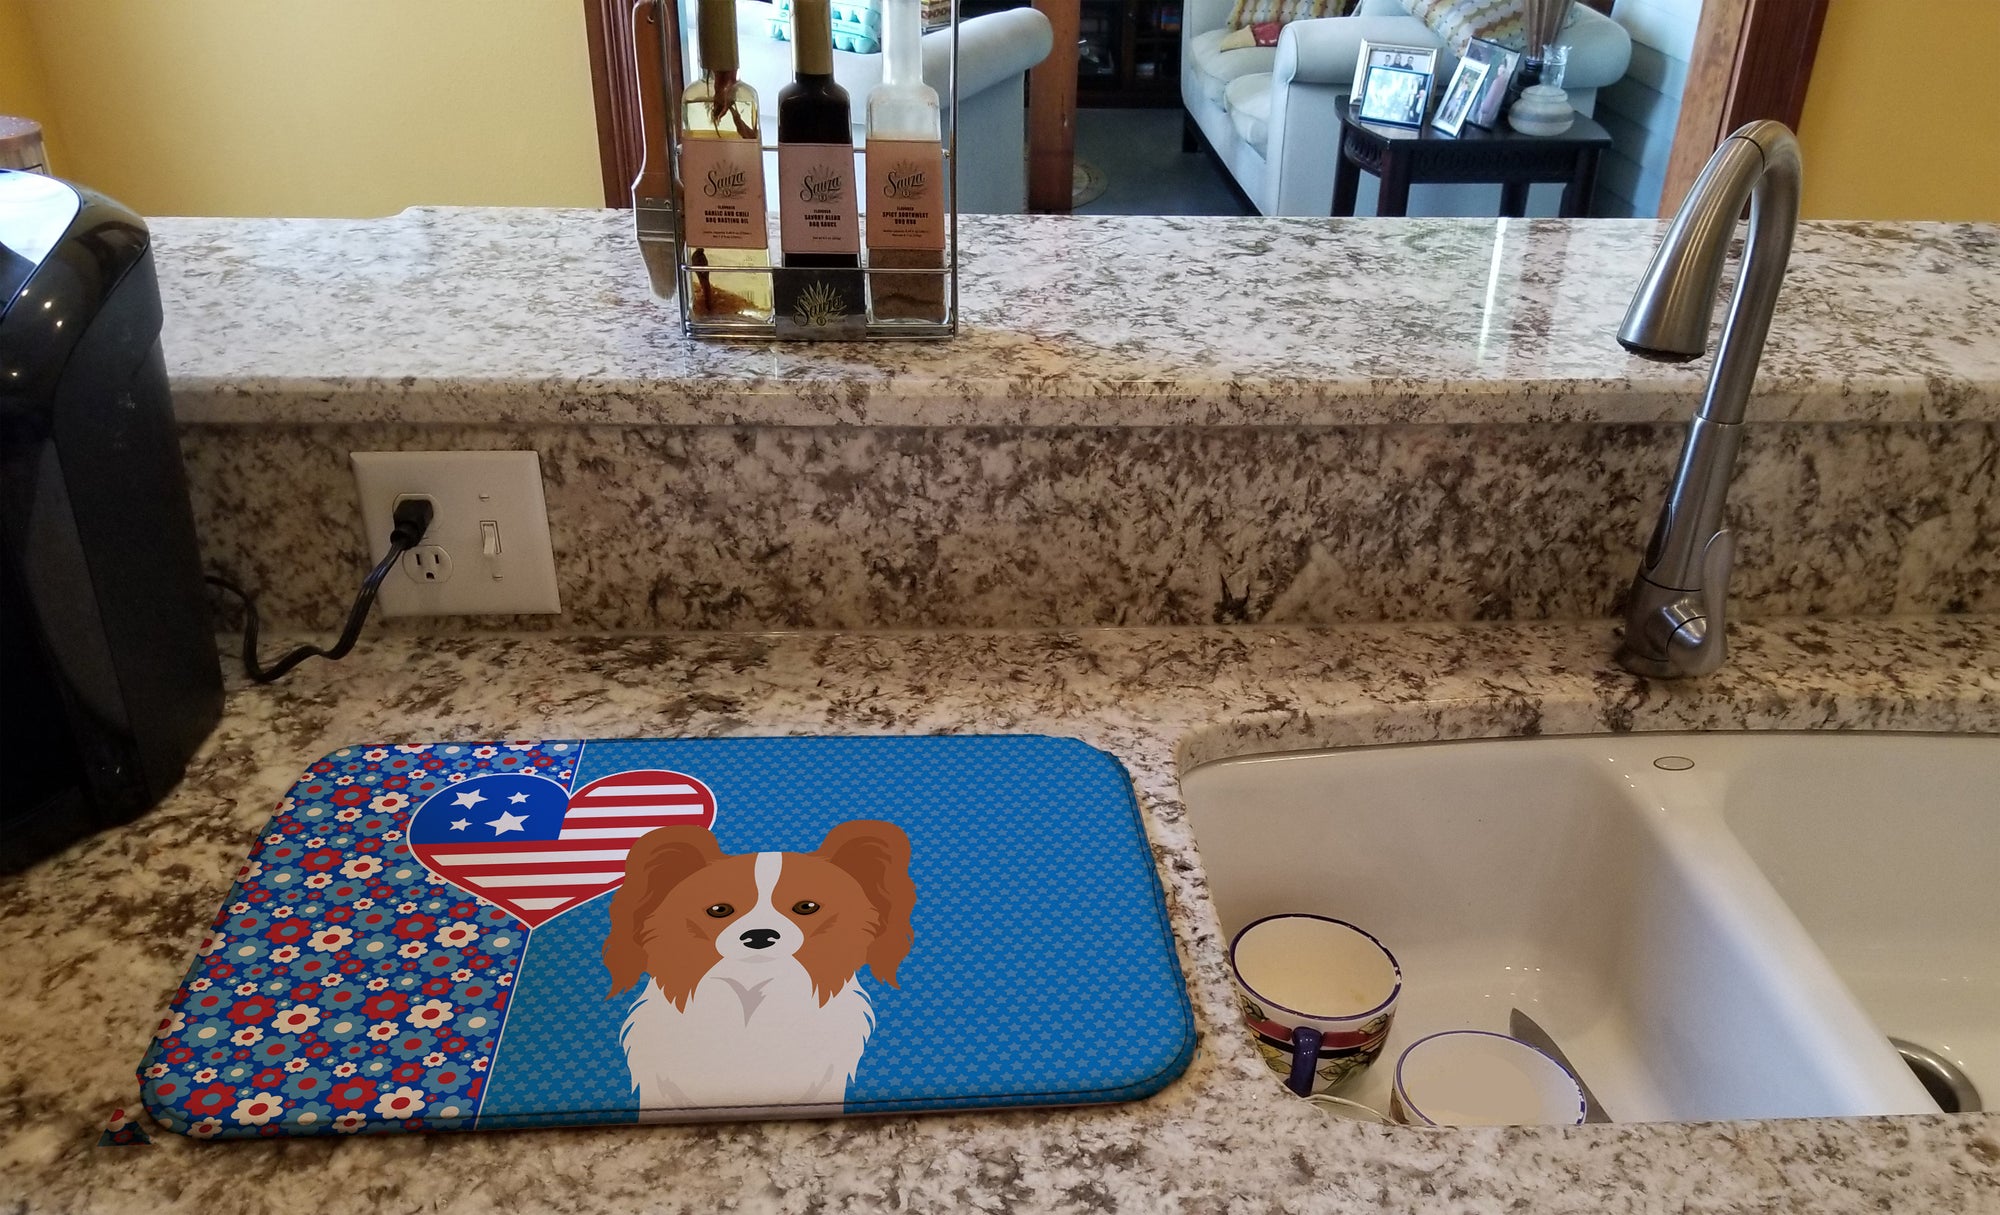 Red and White Papillon USA American Dish Drying Mat